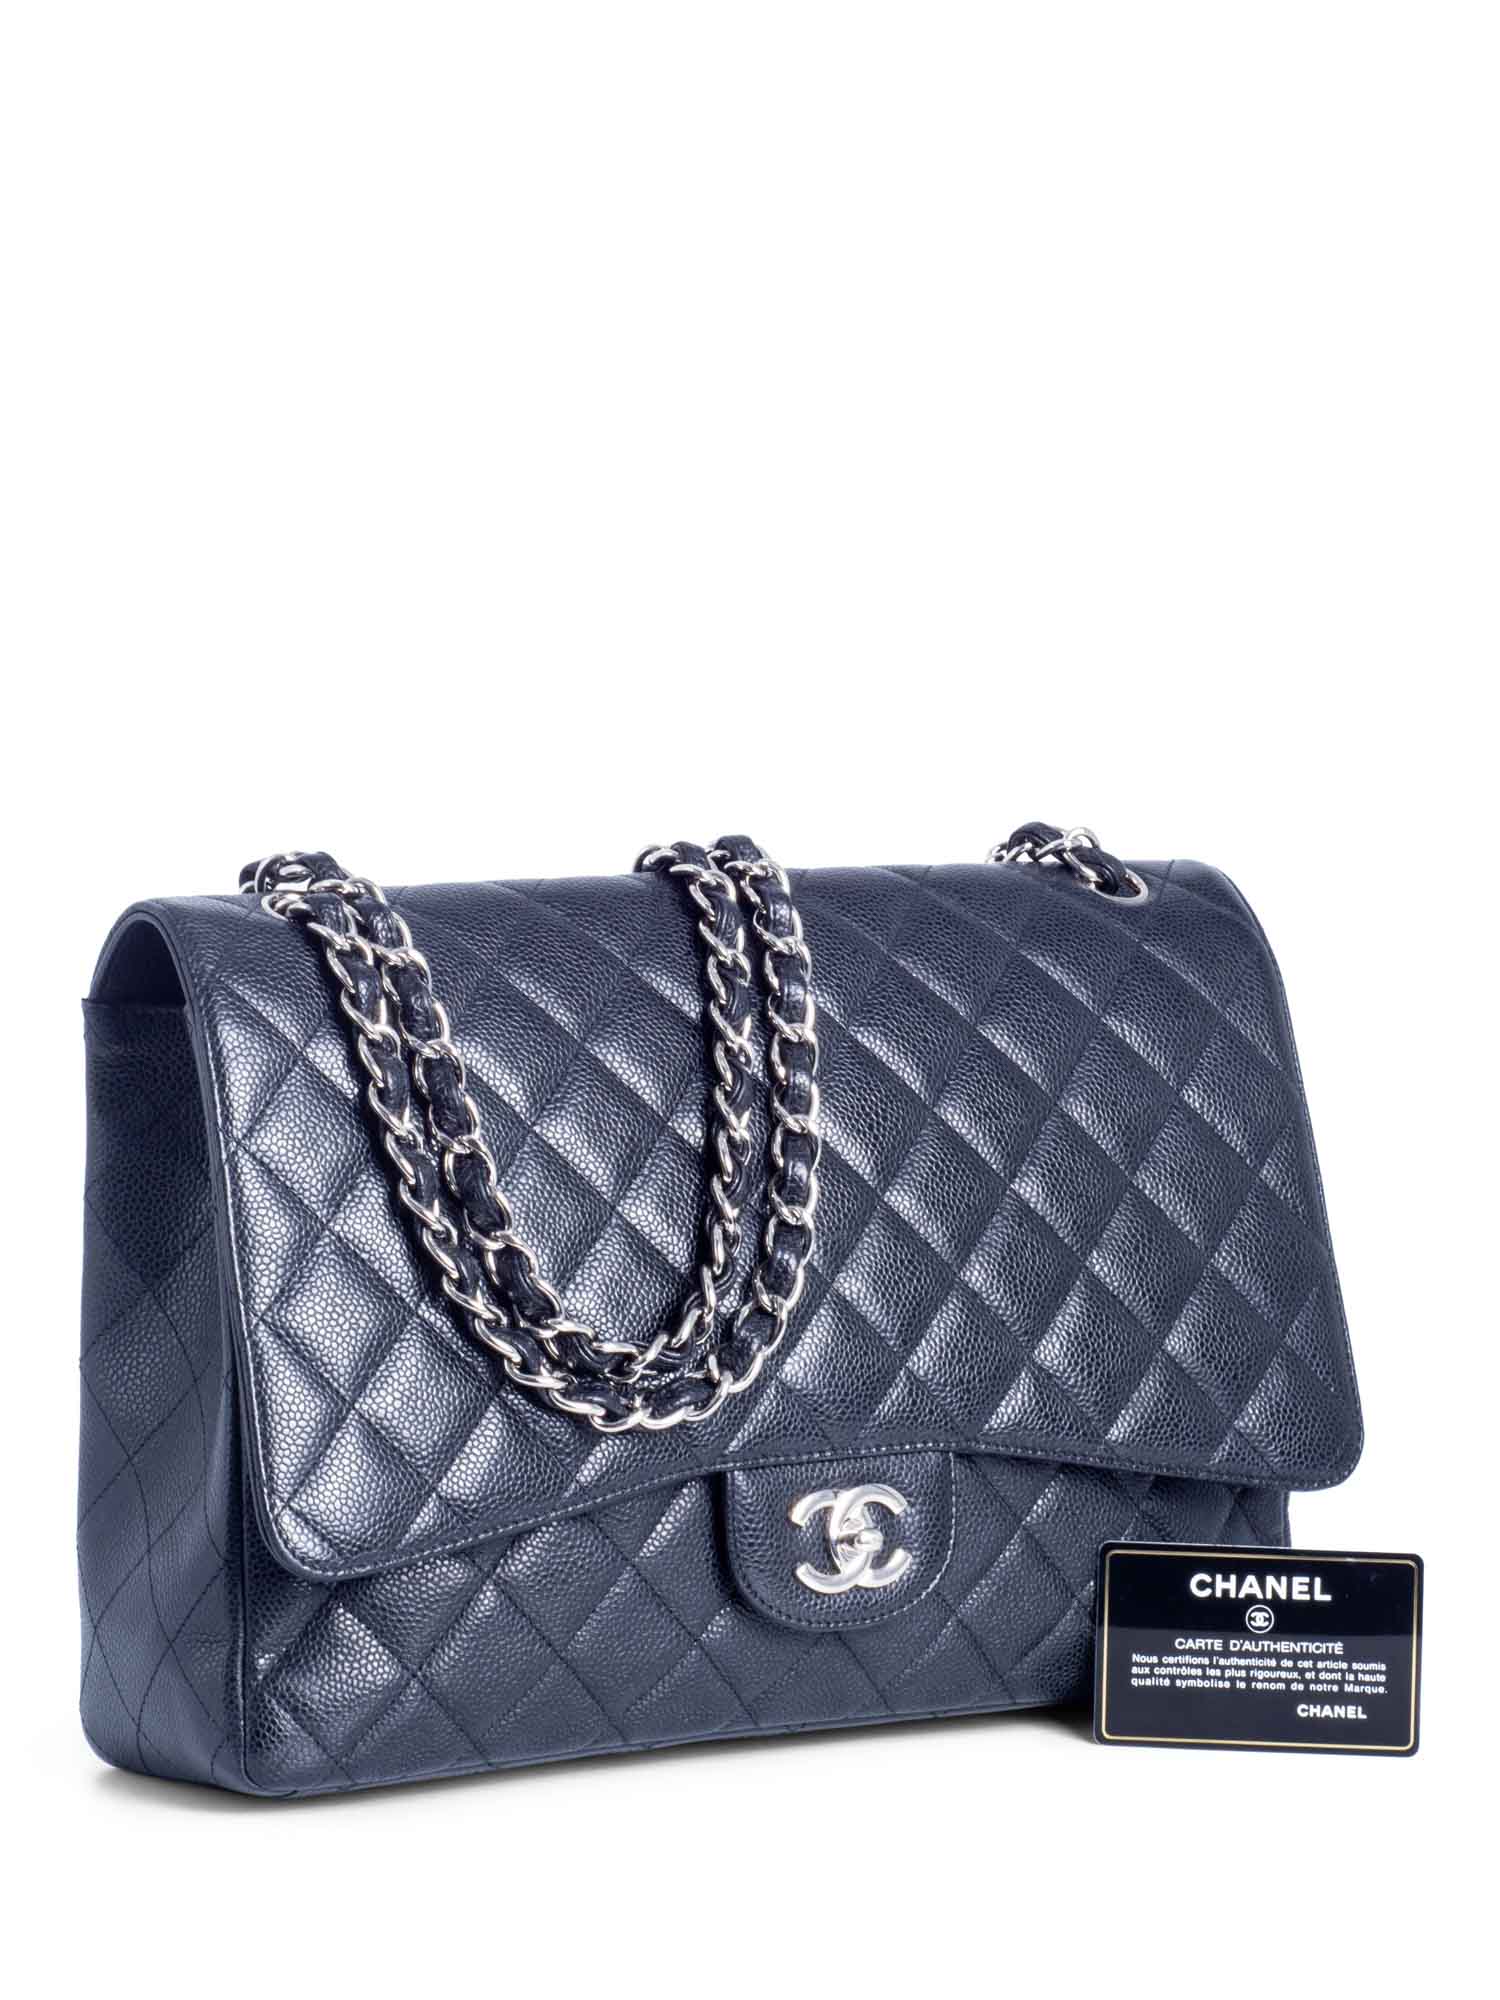 Chanel Code Coco for 5624 for sale from a Seller on Chrono24